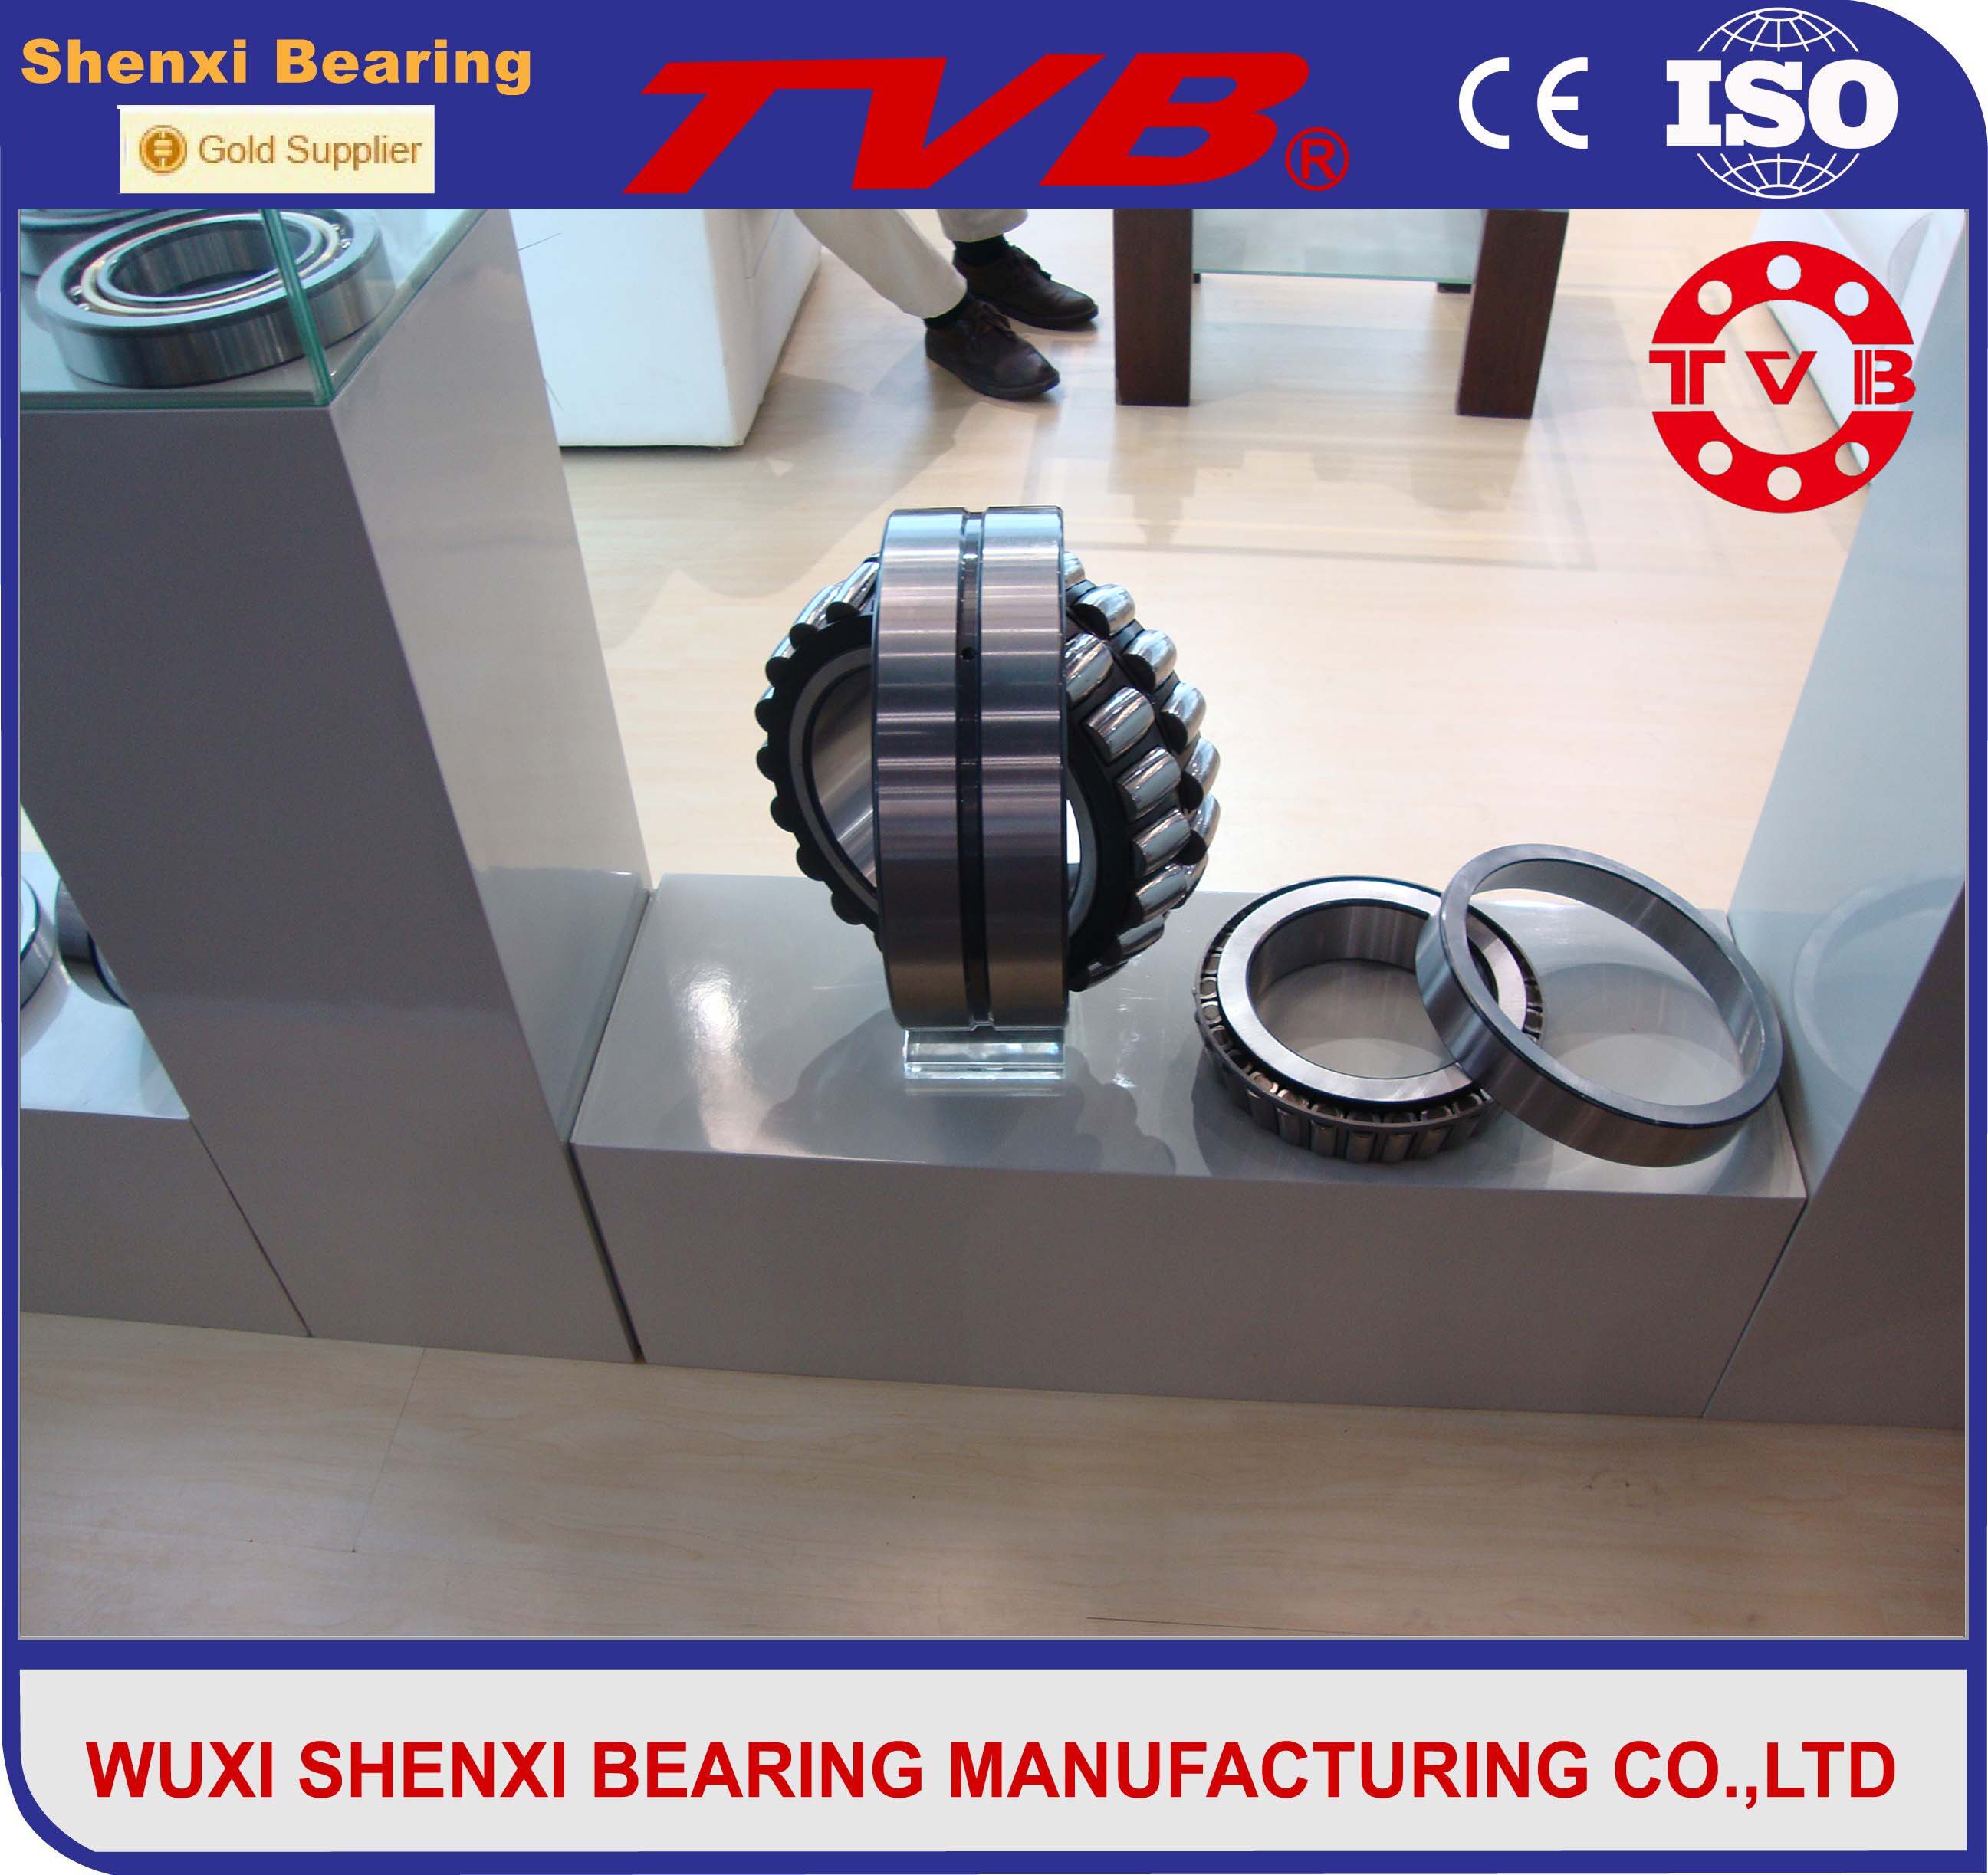 Bearing Made in China supply High precision and good price spherical bearing 23860CAMA spherical rol